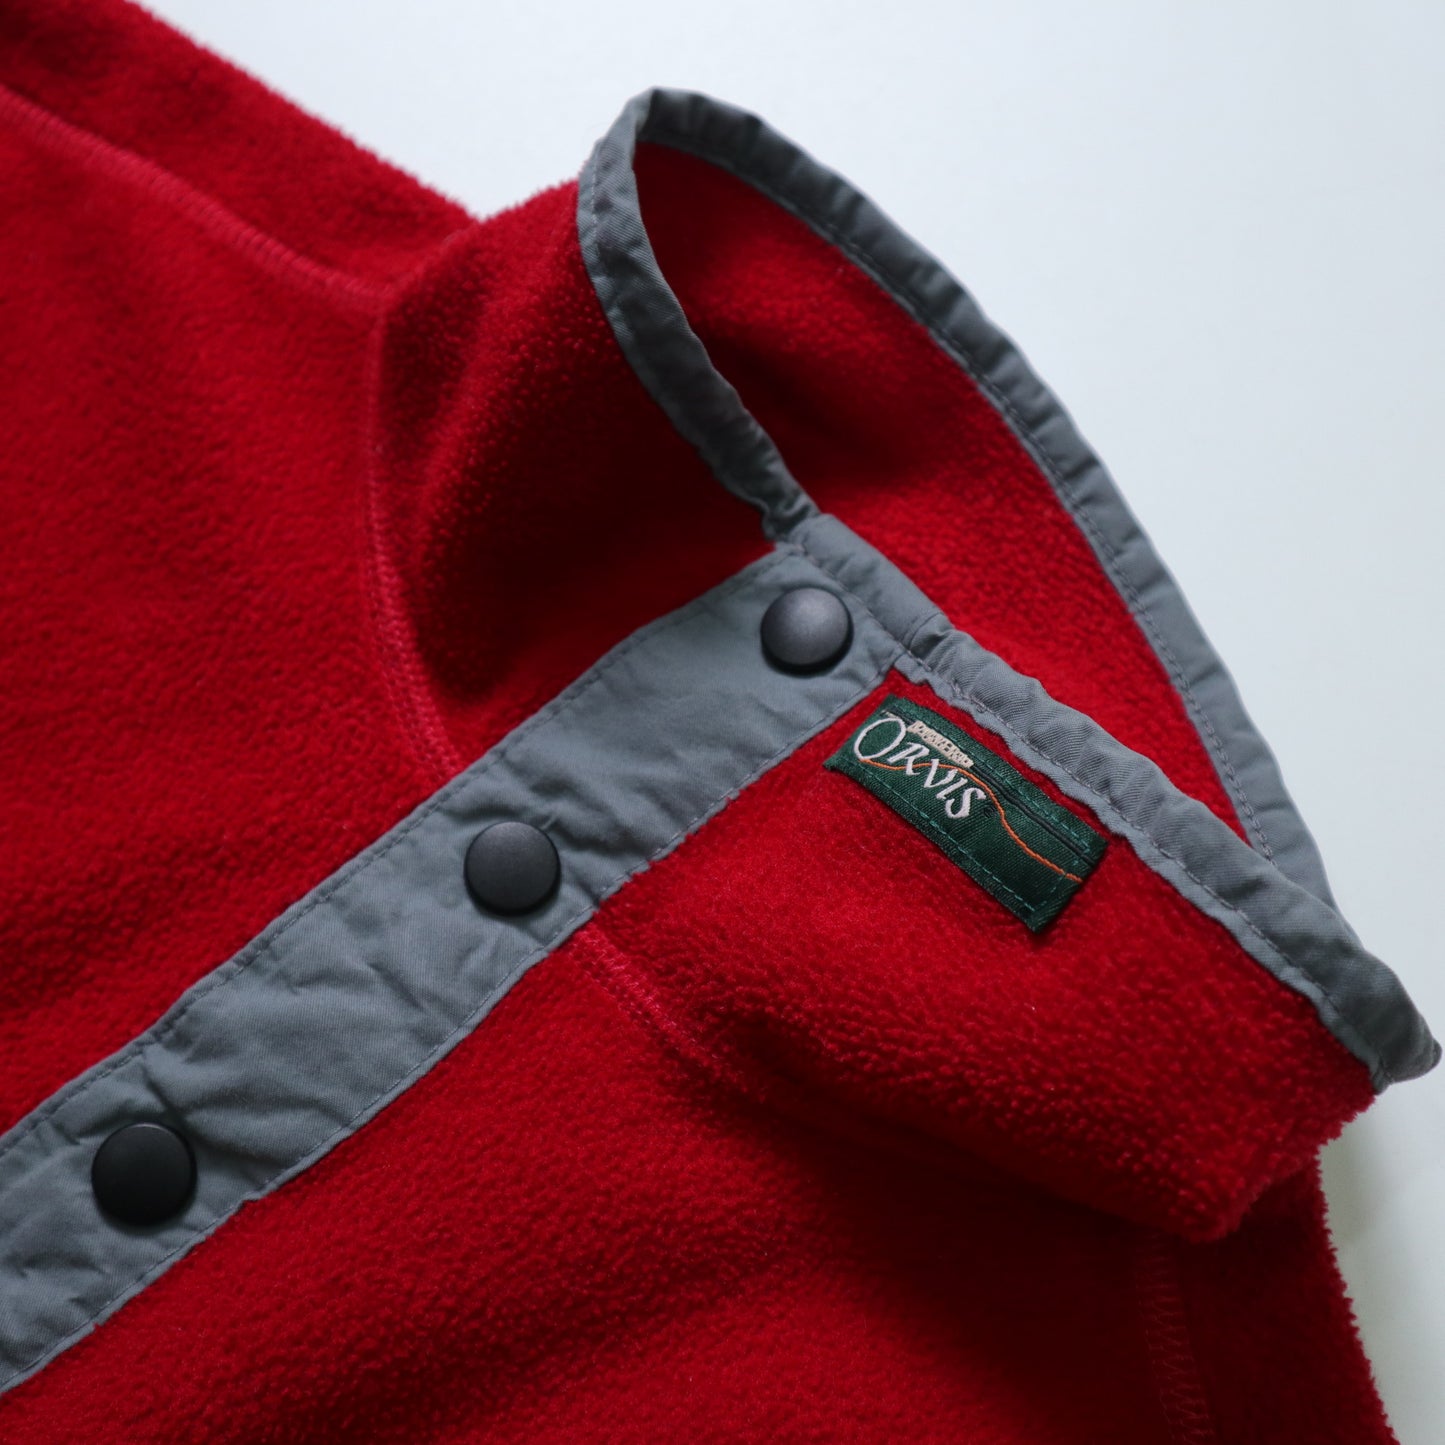 90's ORVIS USA made red fleece pullover